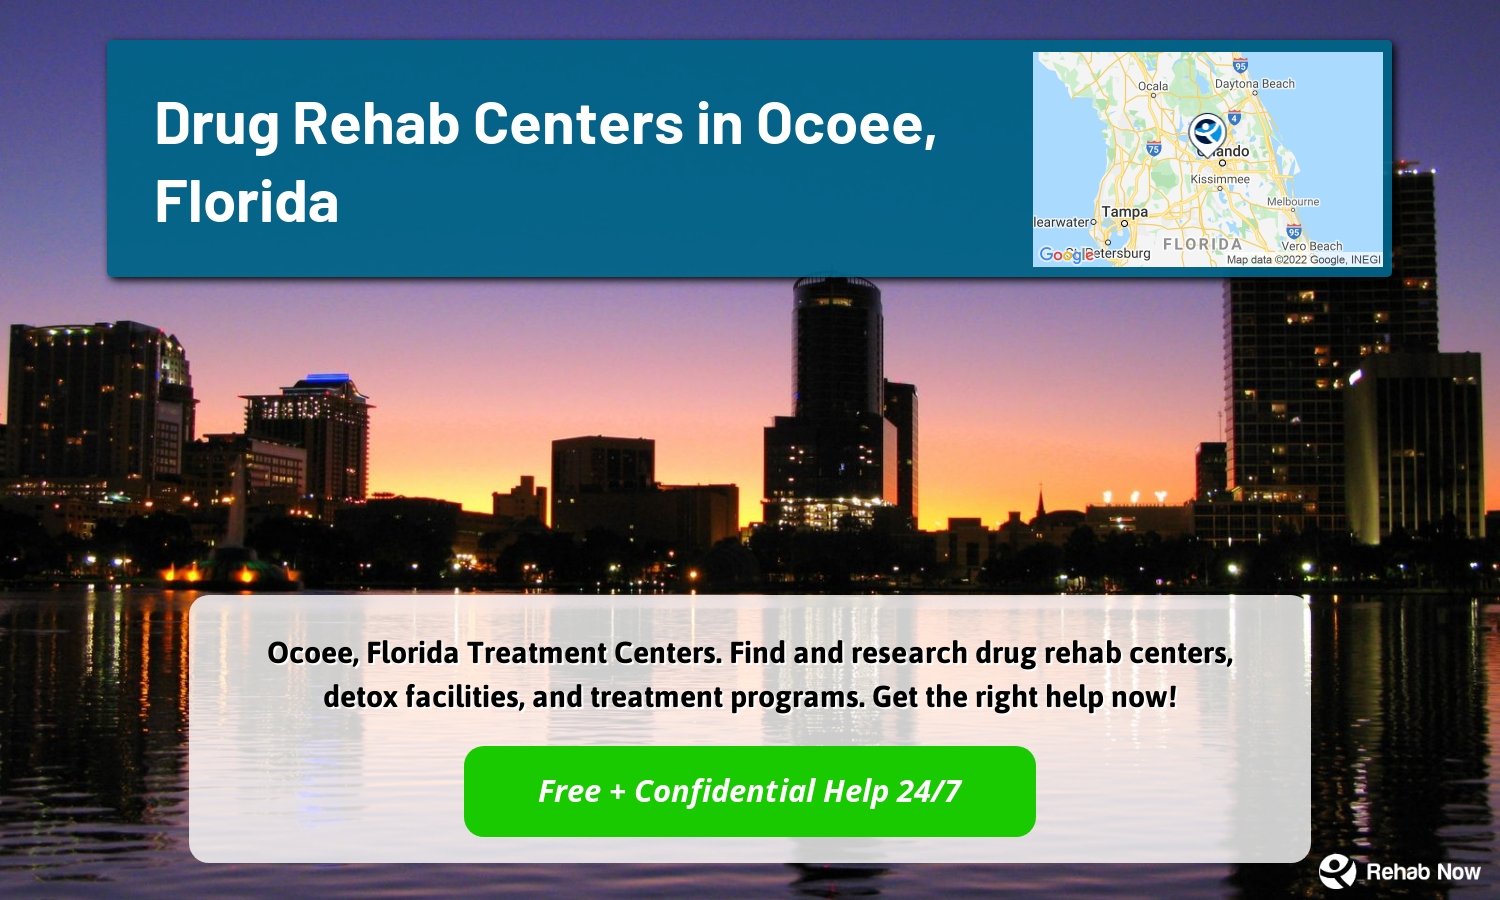 Ocoee, Florida Treatment Centers. Find and research drug rehab centers, detox facilities, and treatment programs. Get the right help now!